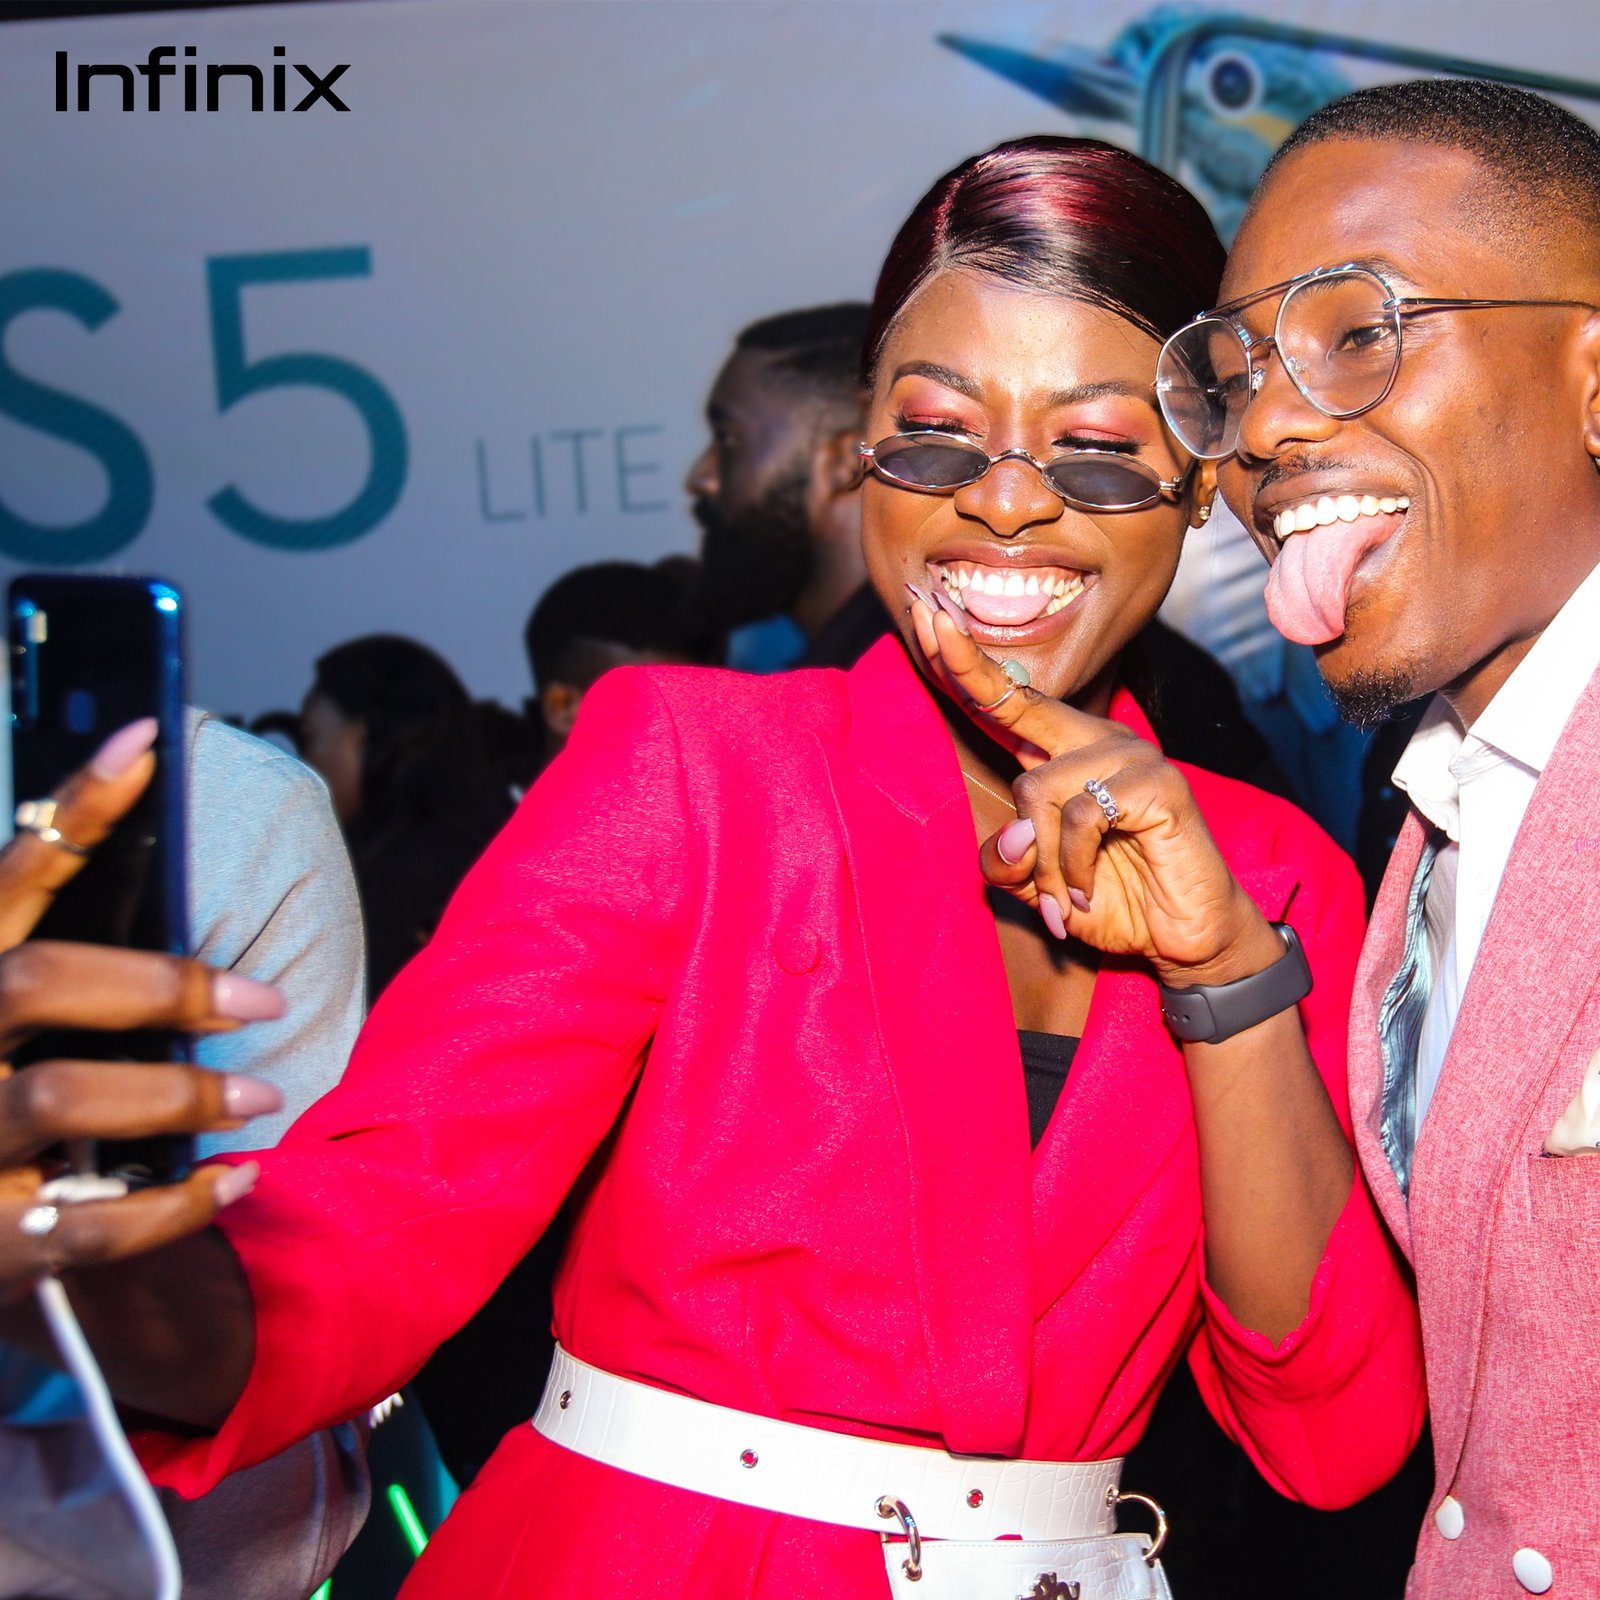 Infinix Unveils its latest Smartphone to the Market